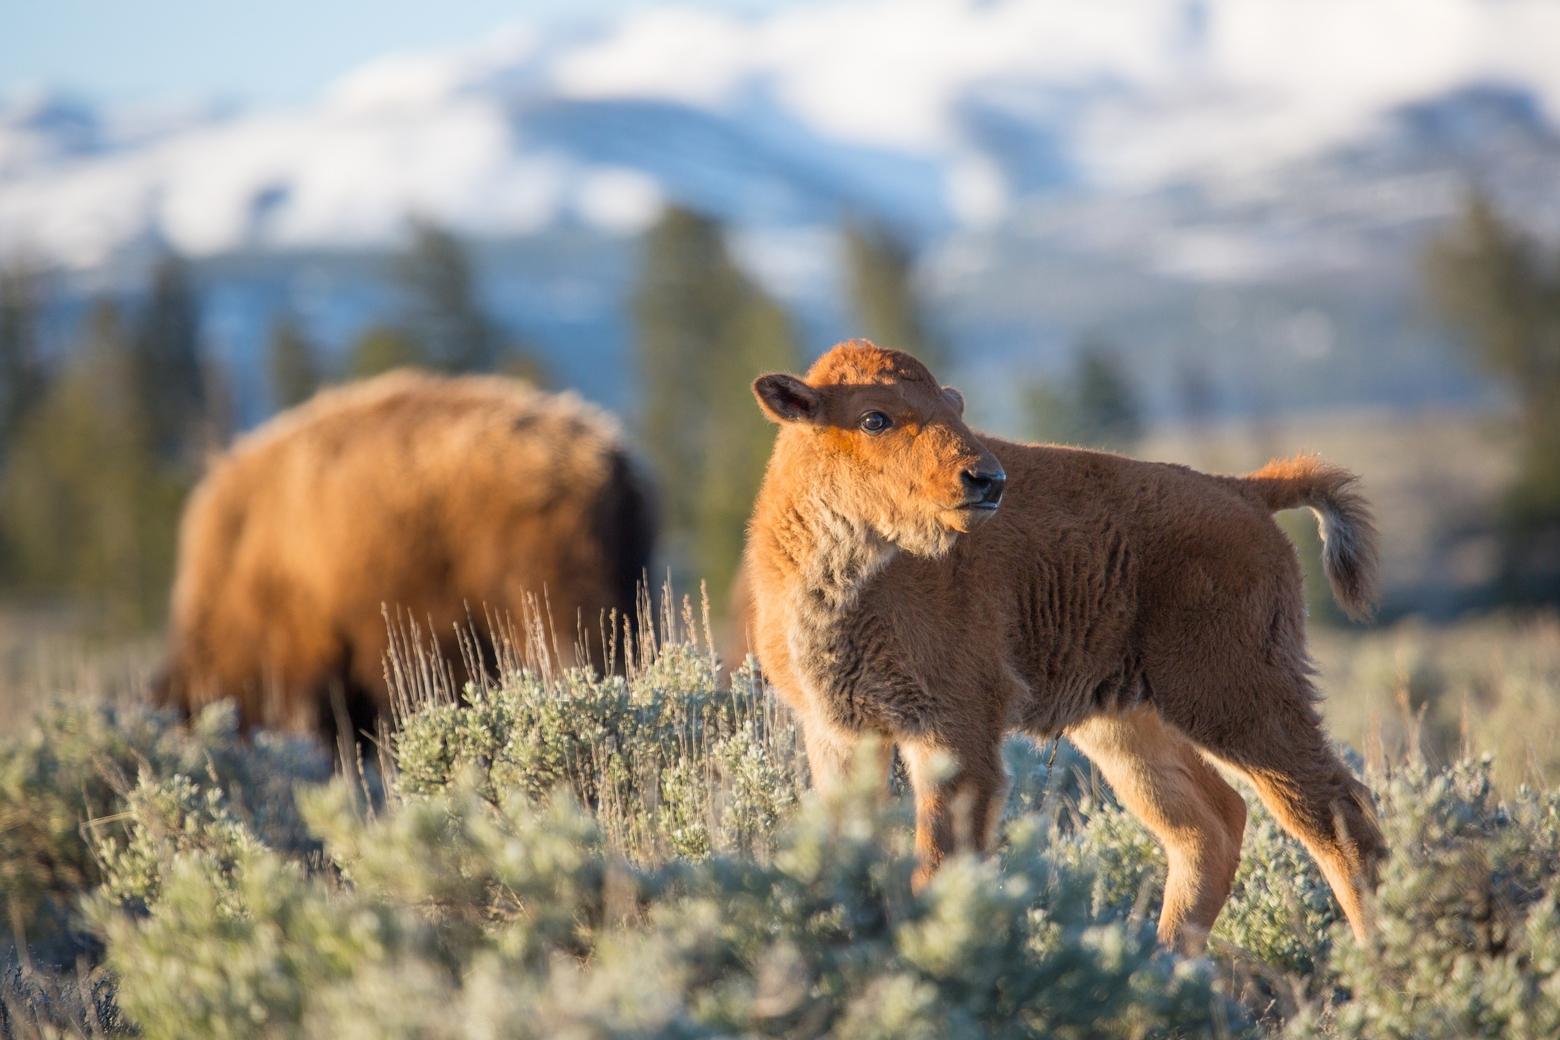 A bison calf at sunrise on Blacktail Deer Plateau in Yellowstone National Park. "Interference by people can cause wildlife to reject their offspring," said the National Park Service in a May 23 statement. Photo by Neal Herbert/NPS